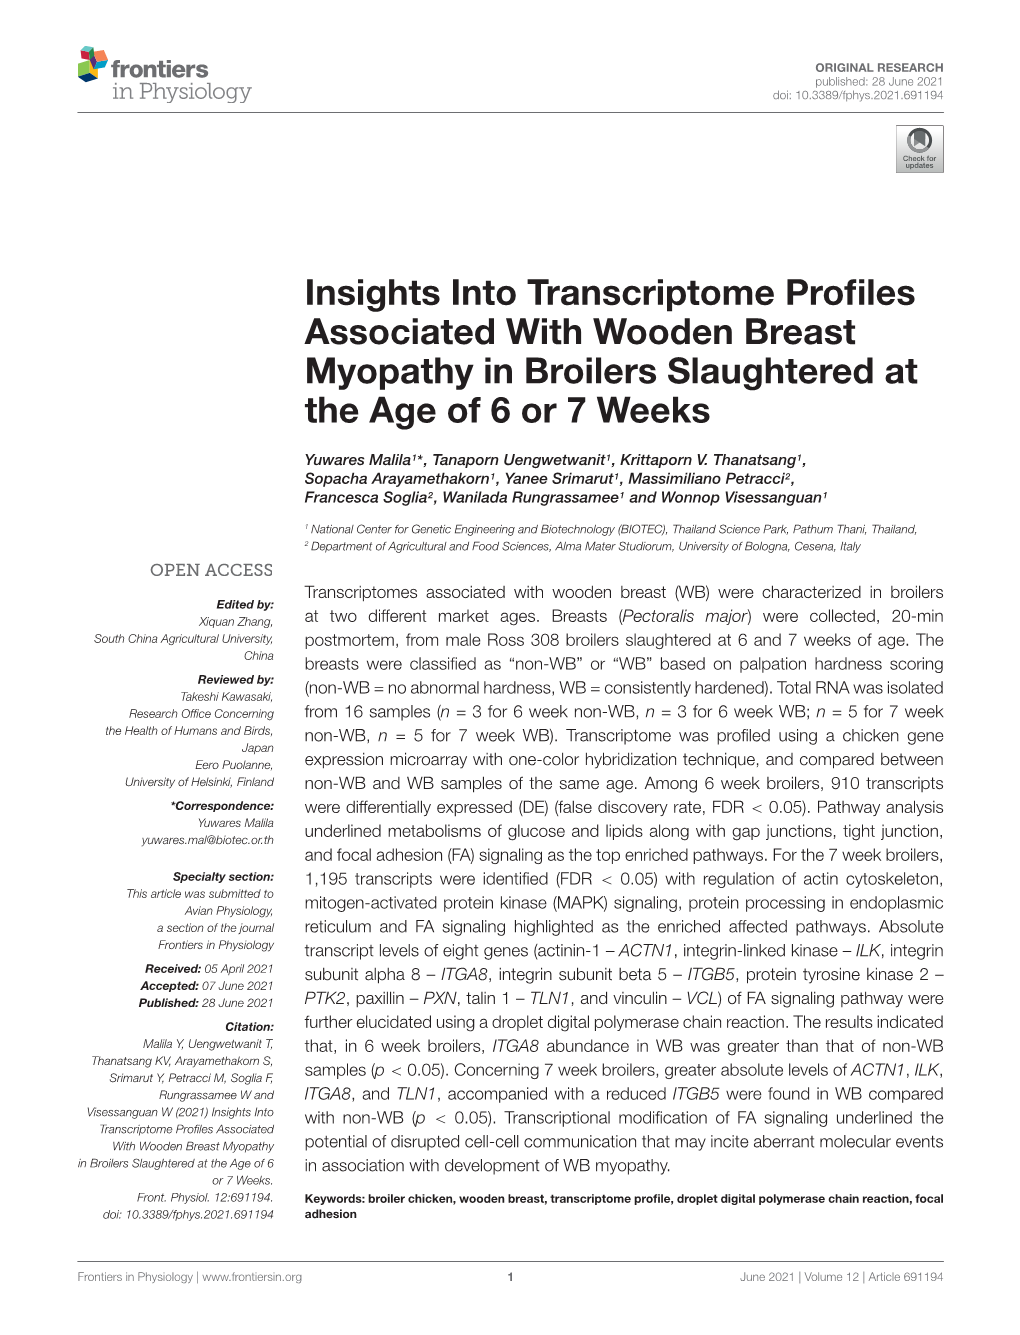 Insights Into Transcriptome Profiles Associated with Wooden Breast